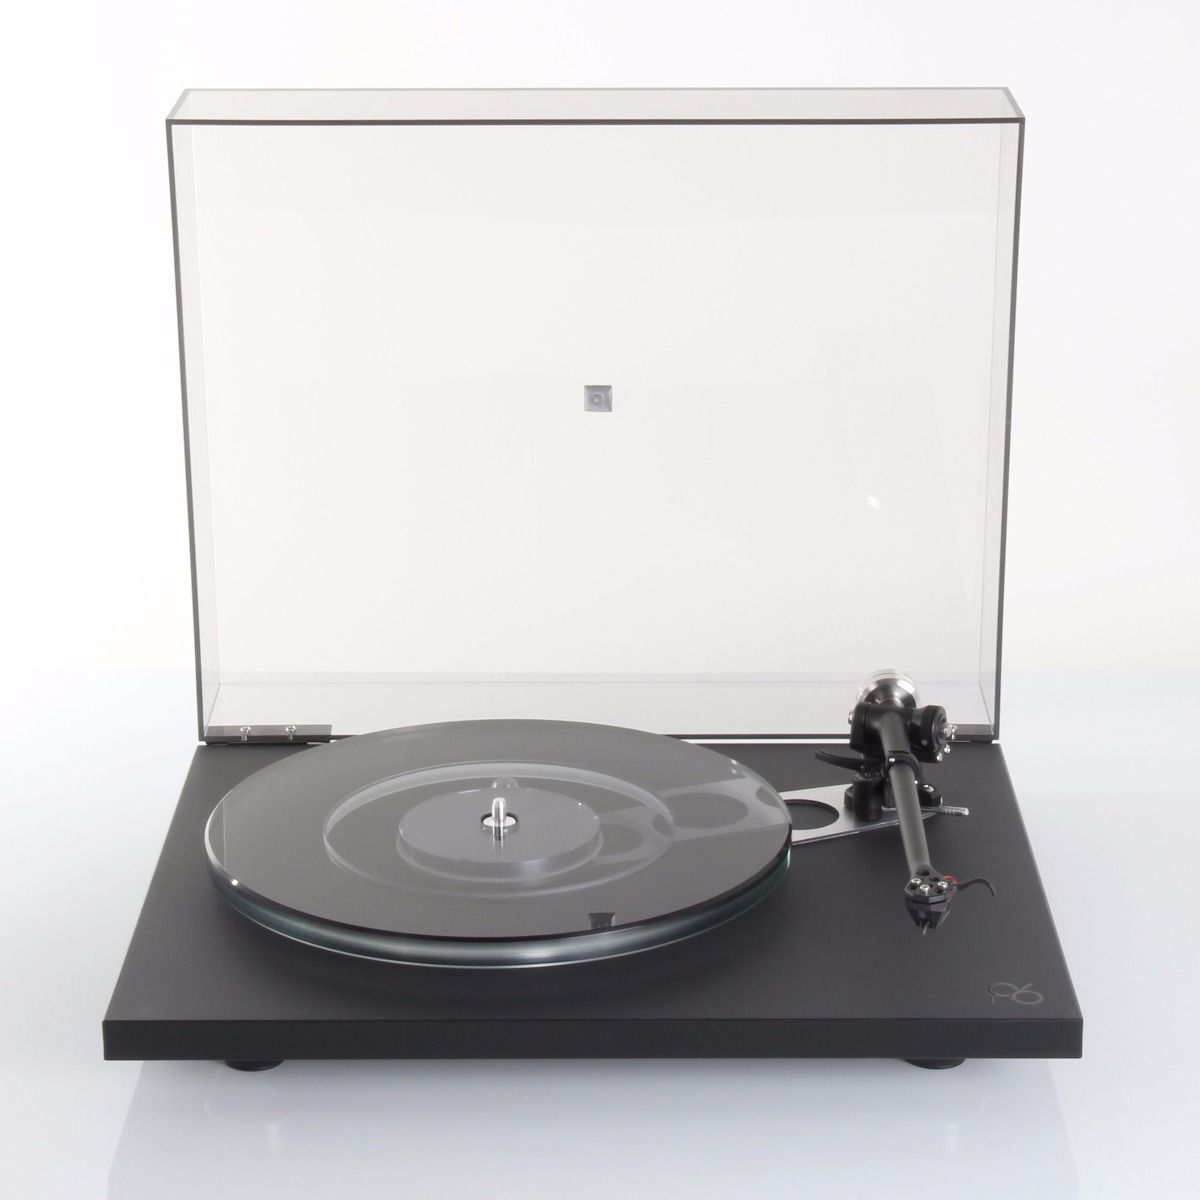 Rega Planar 6 Turntable - Polaris Gray - front view with dustcover open